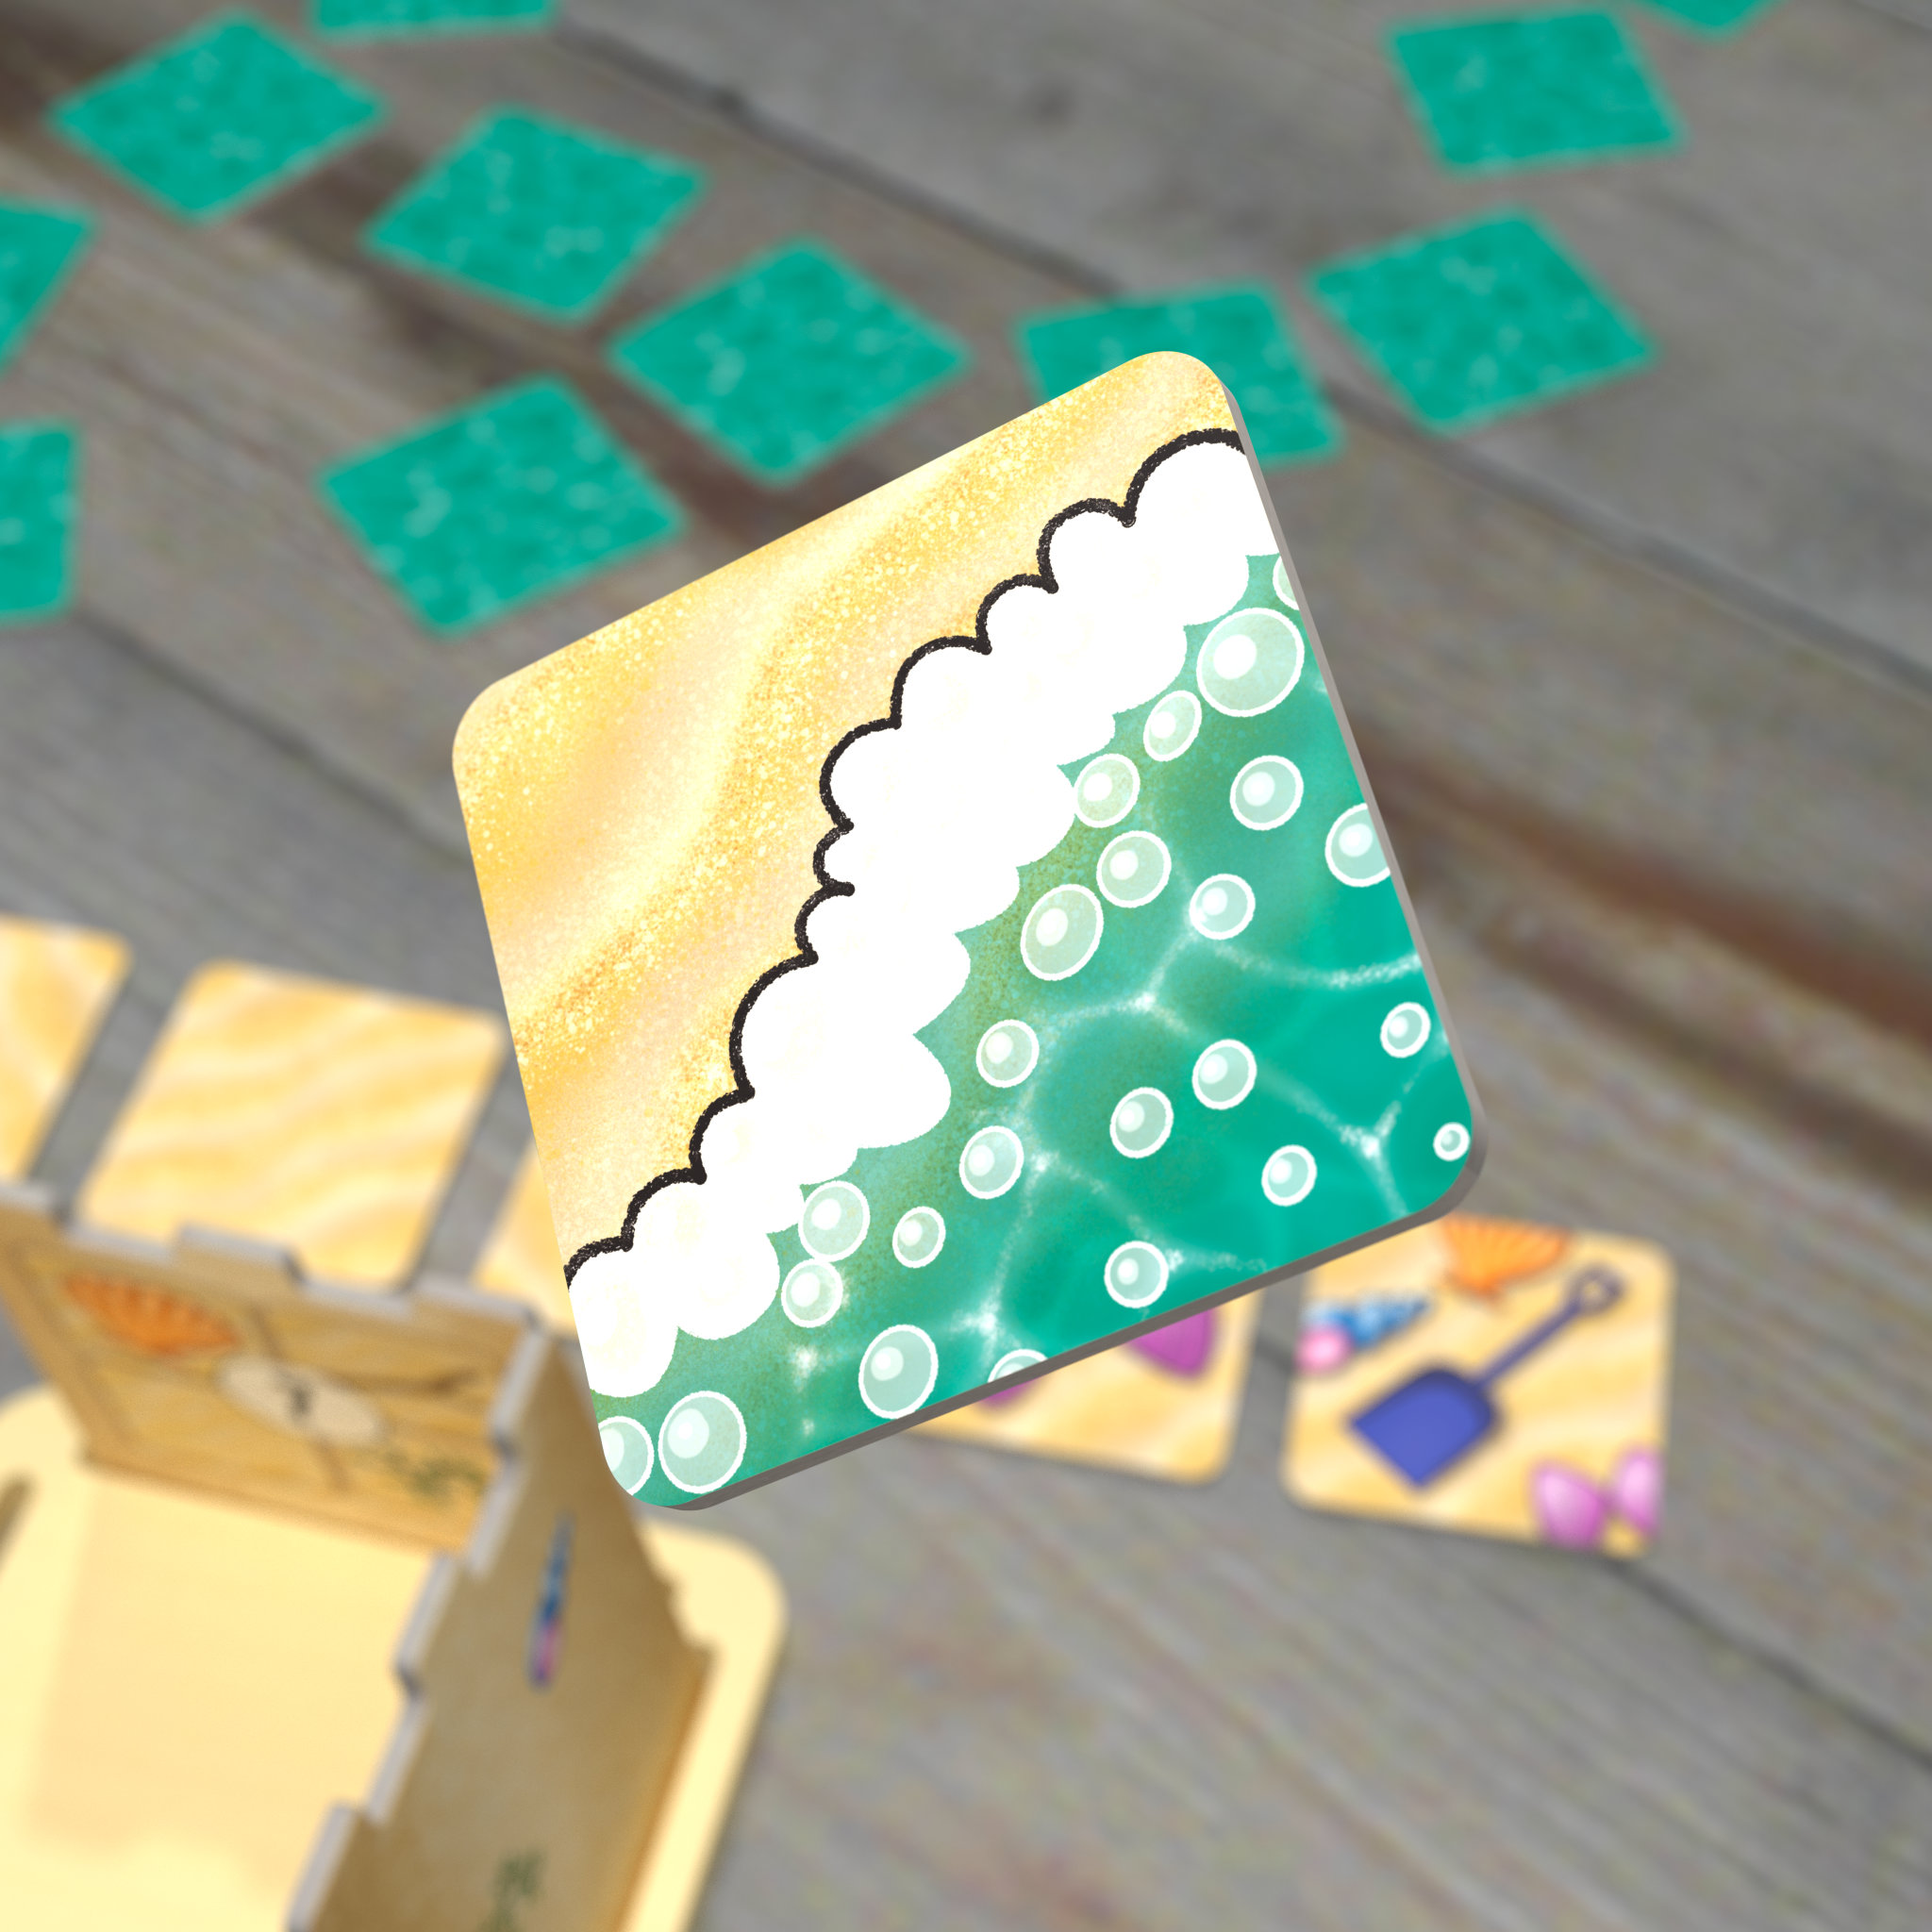 A wave tile hovers over the table. Down below it is a partially built sand castle and a row of decoration tiles.